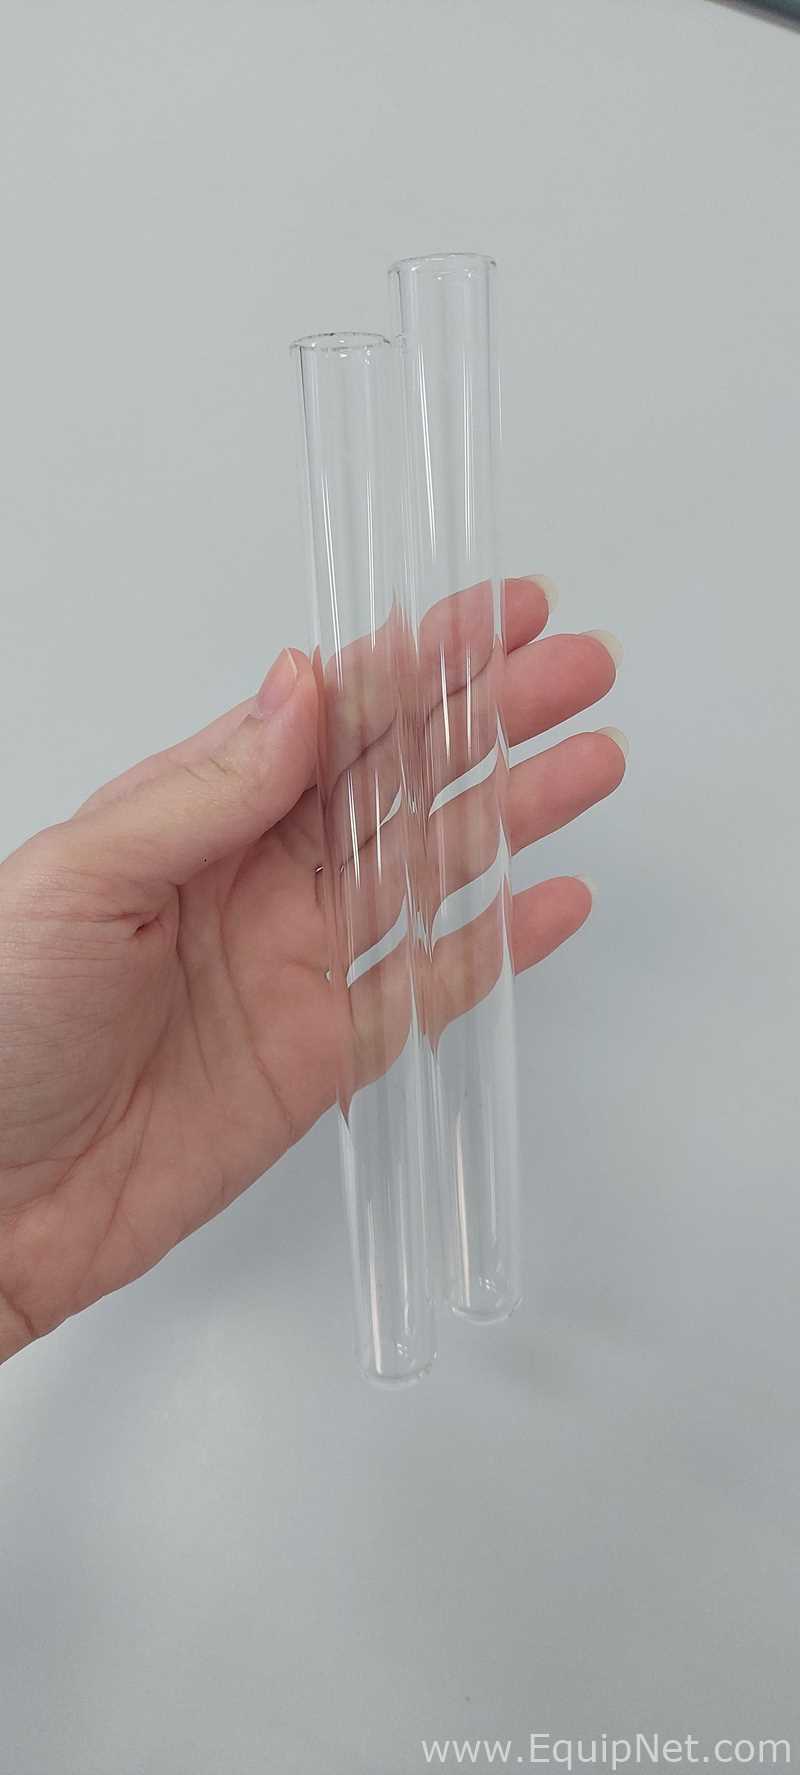 Test Tube with Reinforced Wall Capacity of 30.5g